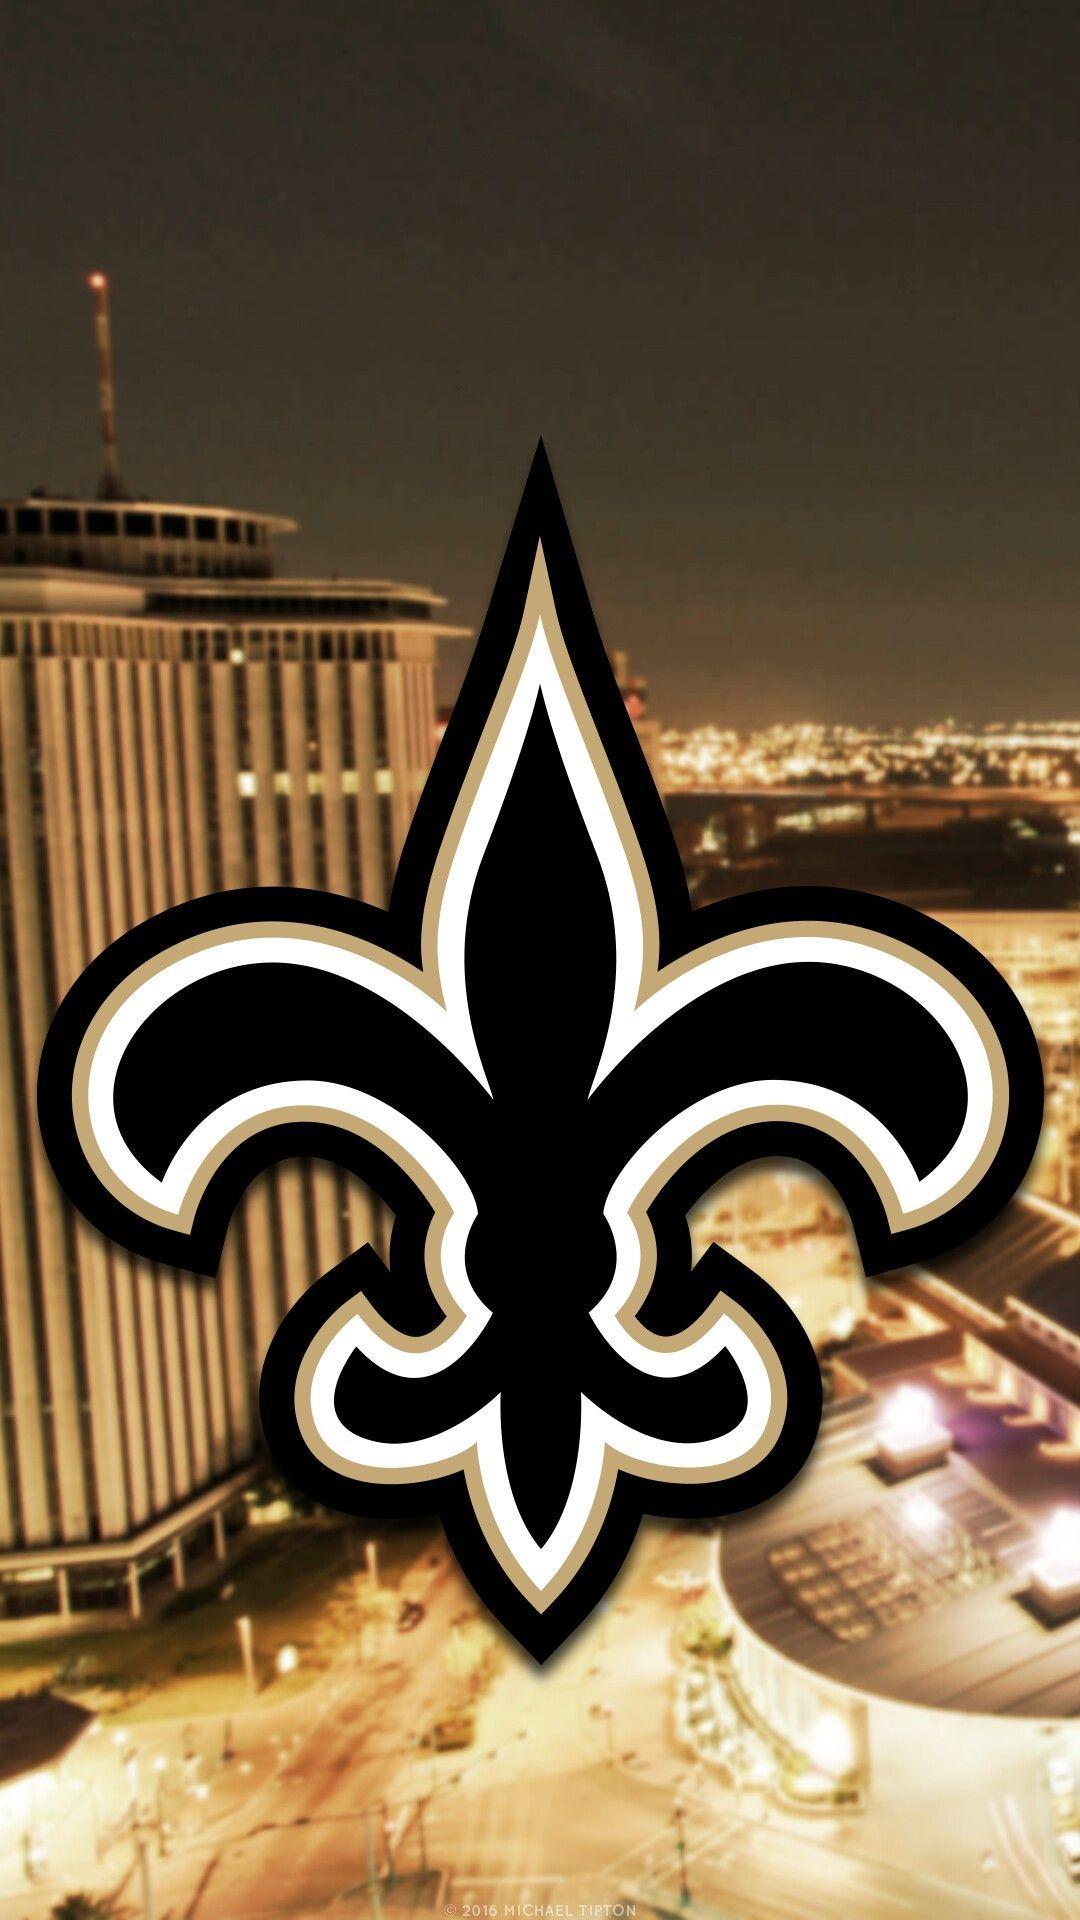 New Orleans Saints IPhone & Android Wallpaper. New